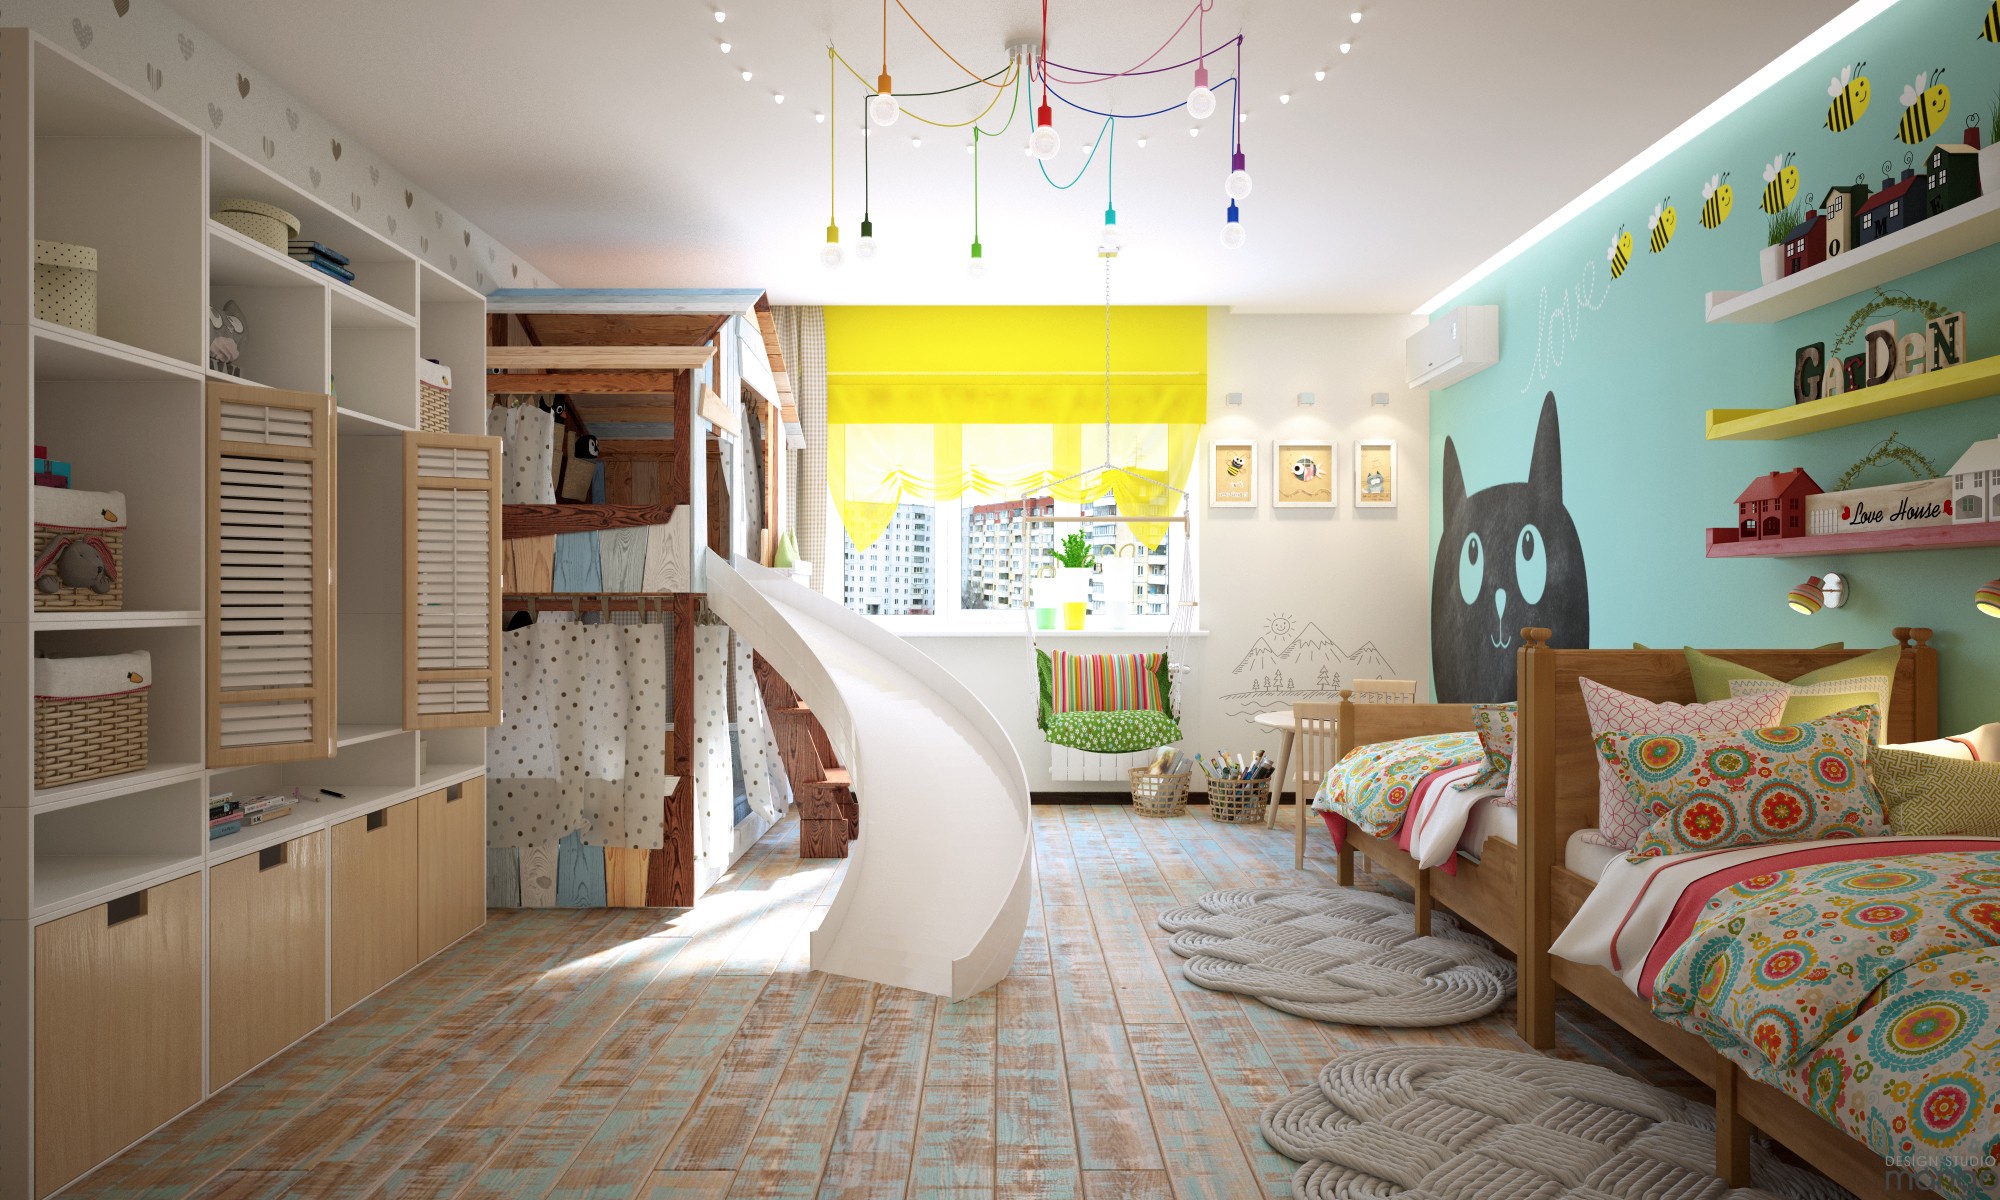 Ideas for wall art decorations for cats "width =" 2000 "height =" 1200 "srcset =" https://mileray.com/wp-content/uploads/2020/05/1588508728_215_Variety-of-Kids-Room-Decorating-Ideas-Which-Apply-With-a.jpg 2000w, https: //mileray.com/wp-content/uploads/2016/11/Design-Studio-Mango10-1-300x180.jpg 300w, https://mileray.com/wp-content/uploads/2016/11/Design-Studio -Mango10-1-768x461.jpg 768w, https://mileray.com/wp-content/uploads/2016/11/Design-Studio-Mango10-1-1024x614.jpg 1024w, https://mileray.com/wp -content / uploads / 2016/11 / Design-Studio-Mango10-1-696x418.jpg 696w, https://mileray.com/wp-content/uploads/2016/11/Design-Studio-Mango10-1-1068x641. jpg 1068w, https://mileray.com/wp-content/uploads/2016/11/Design-Studio-Mango10-1-700x420.jpg 700w "sizes =" (maximum width: 2000px) 100vw, 2000px